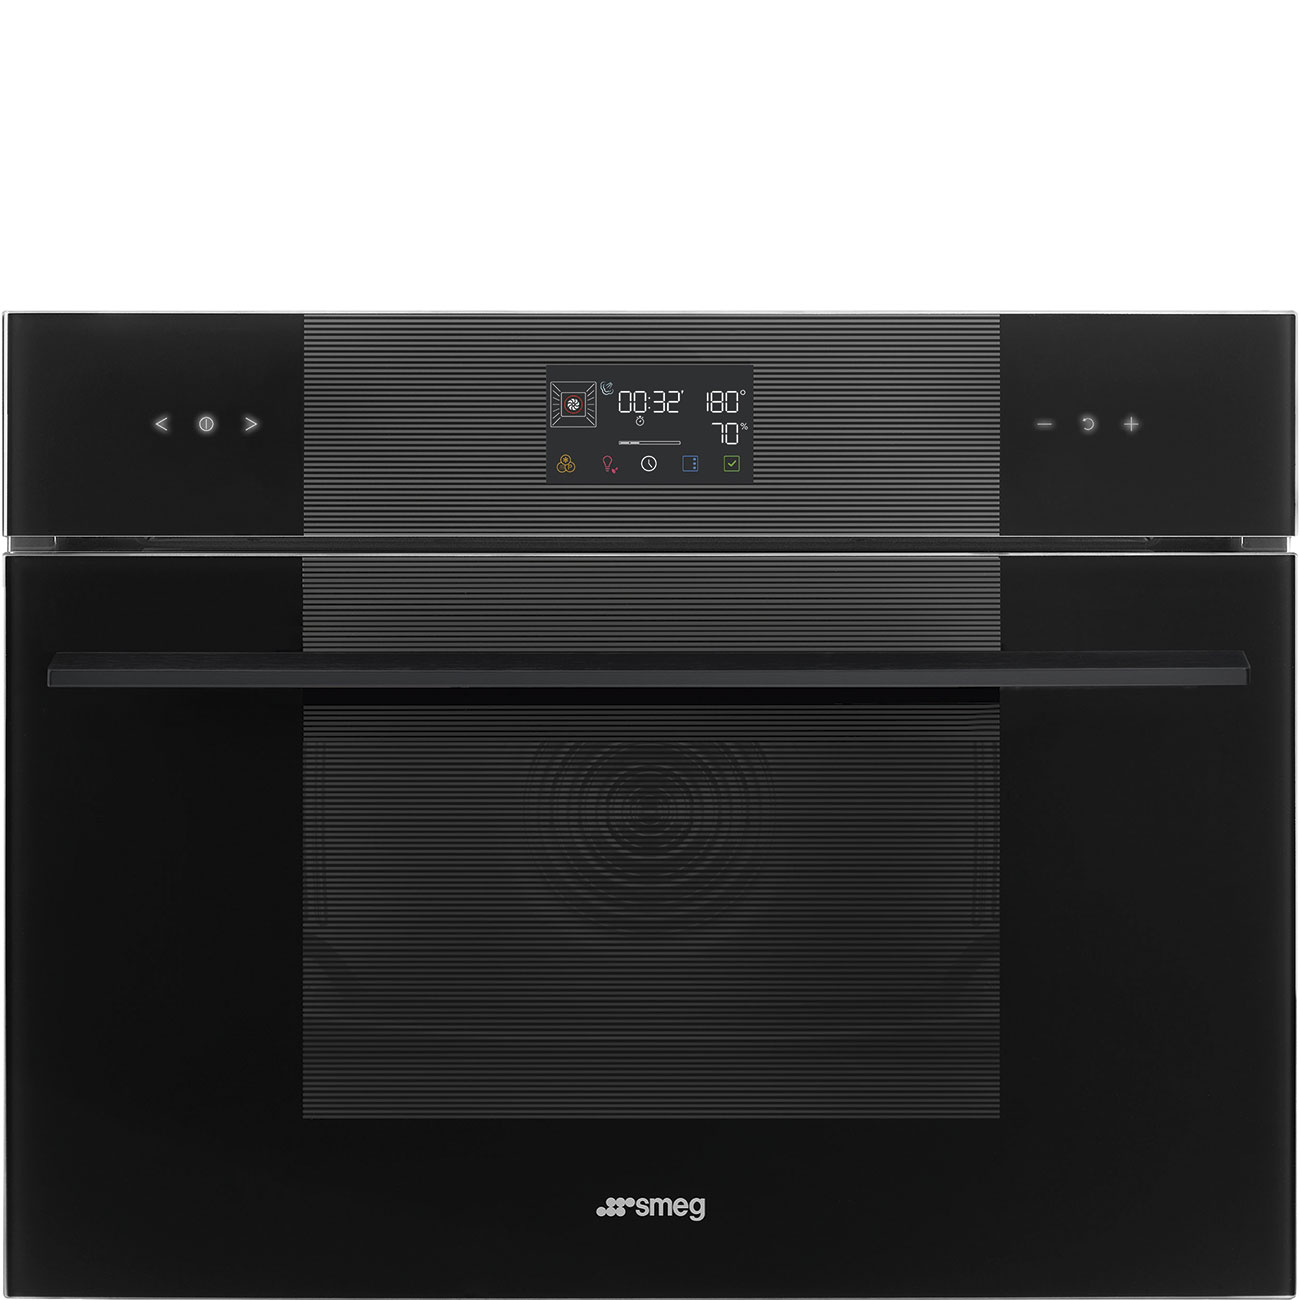 Black Steam100 Galileo Oven.  45cm compact. Built-in. Smeg_1